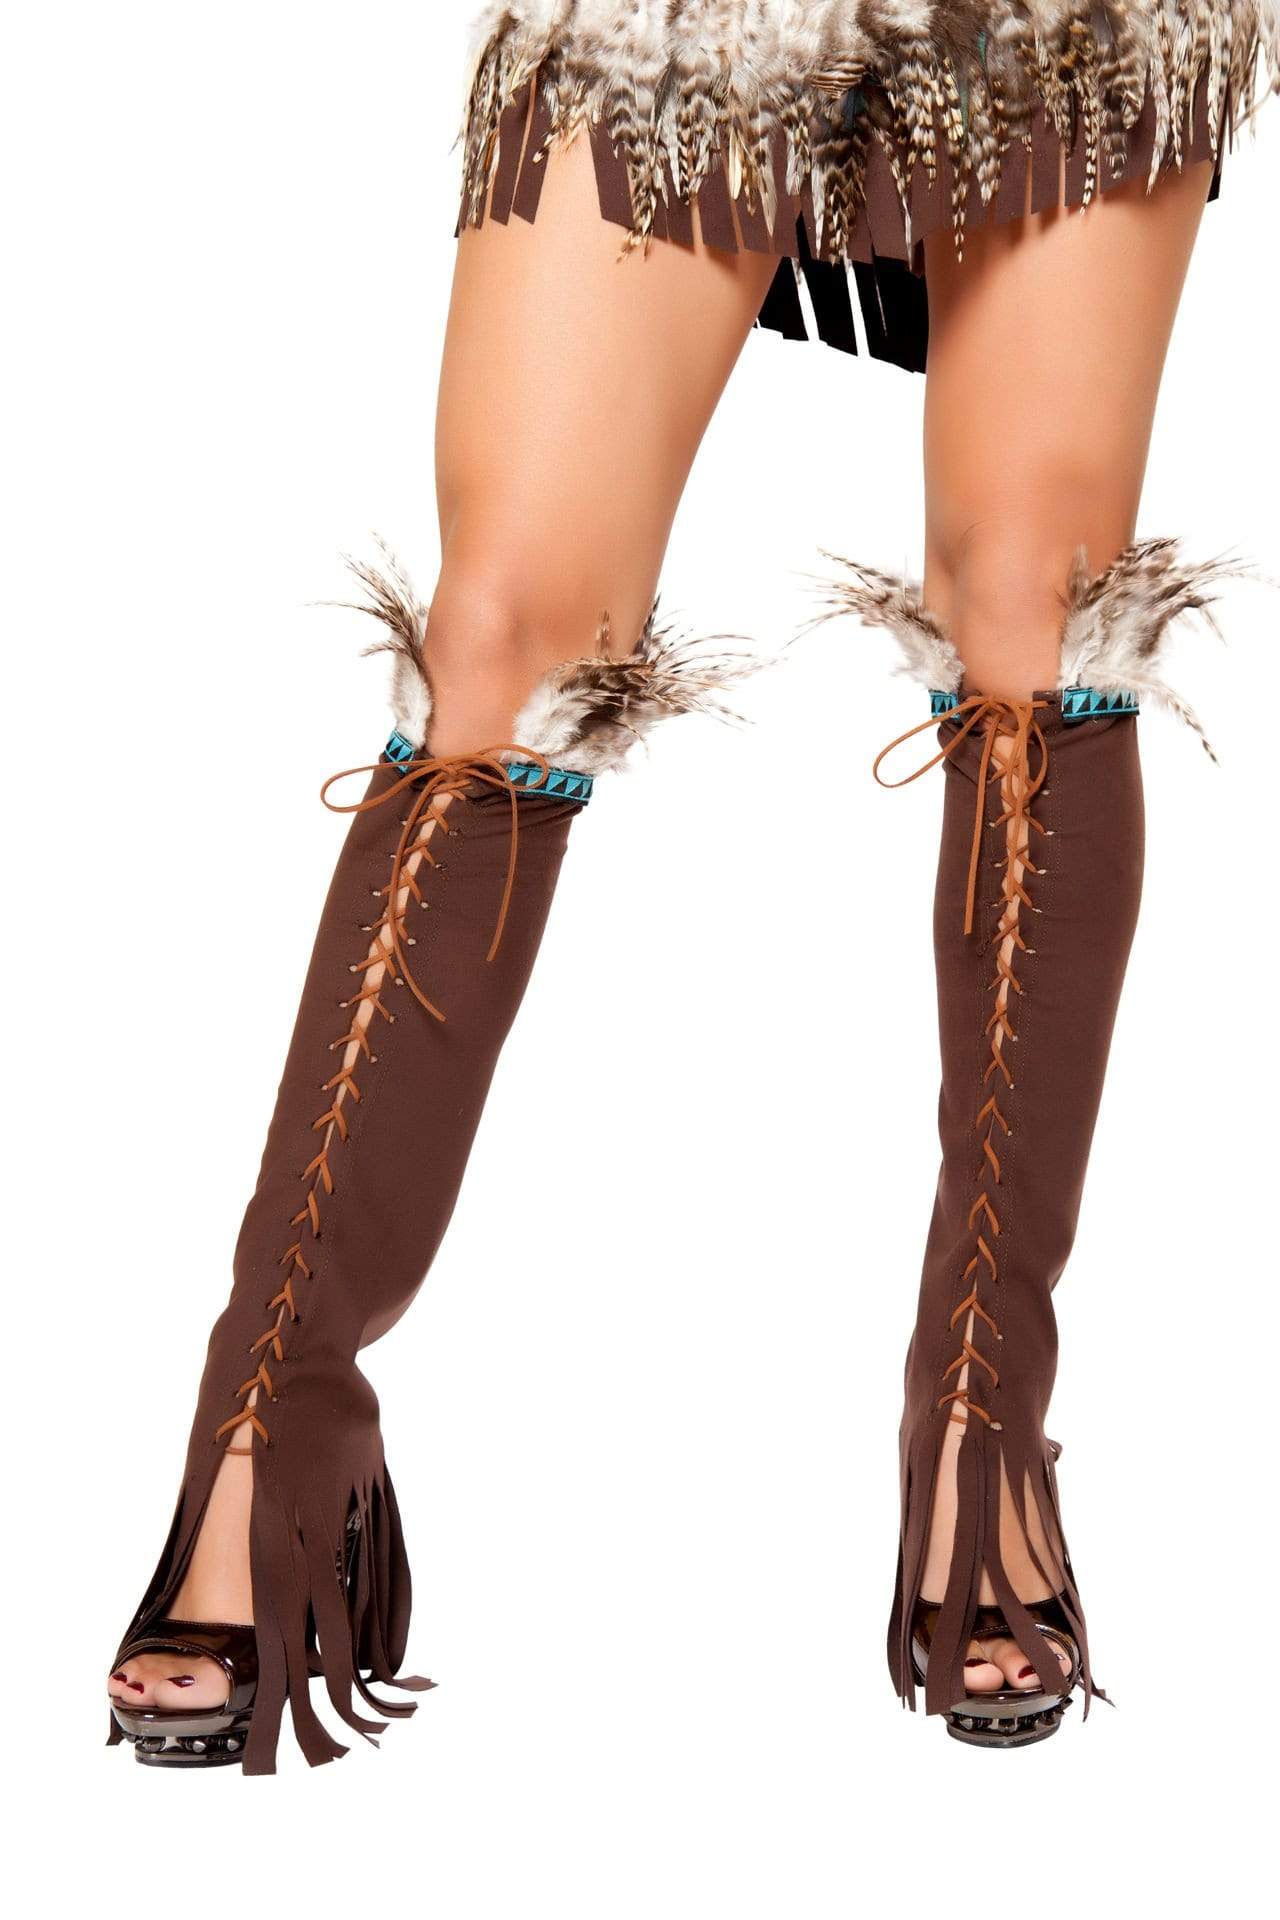 Roma OS / Brown/Honey Lace Up Suede Leg Warmer SHC-LW10106-OS-R Apparel & Accessories > Costumes & Accessories > Costumes